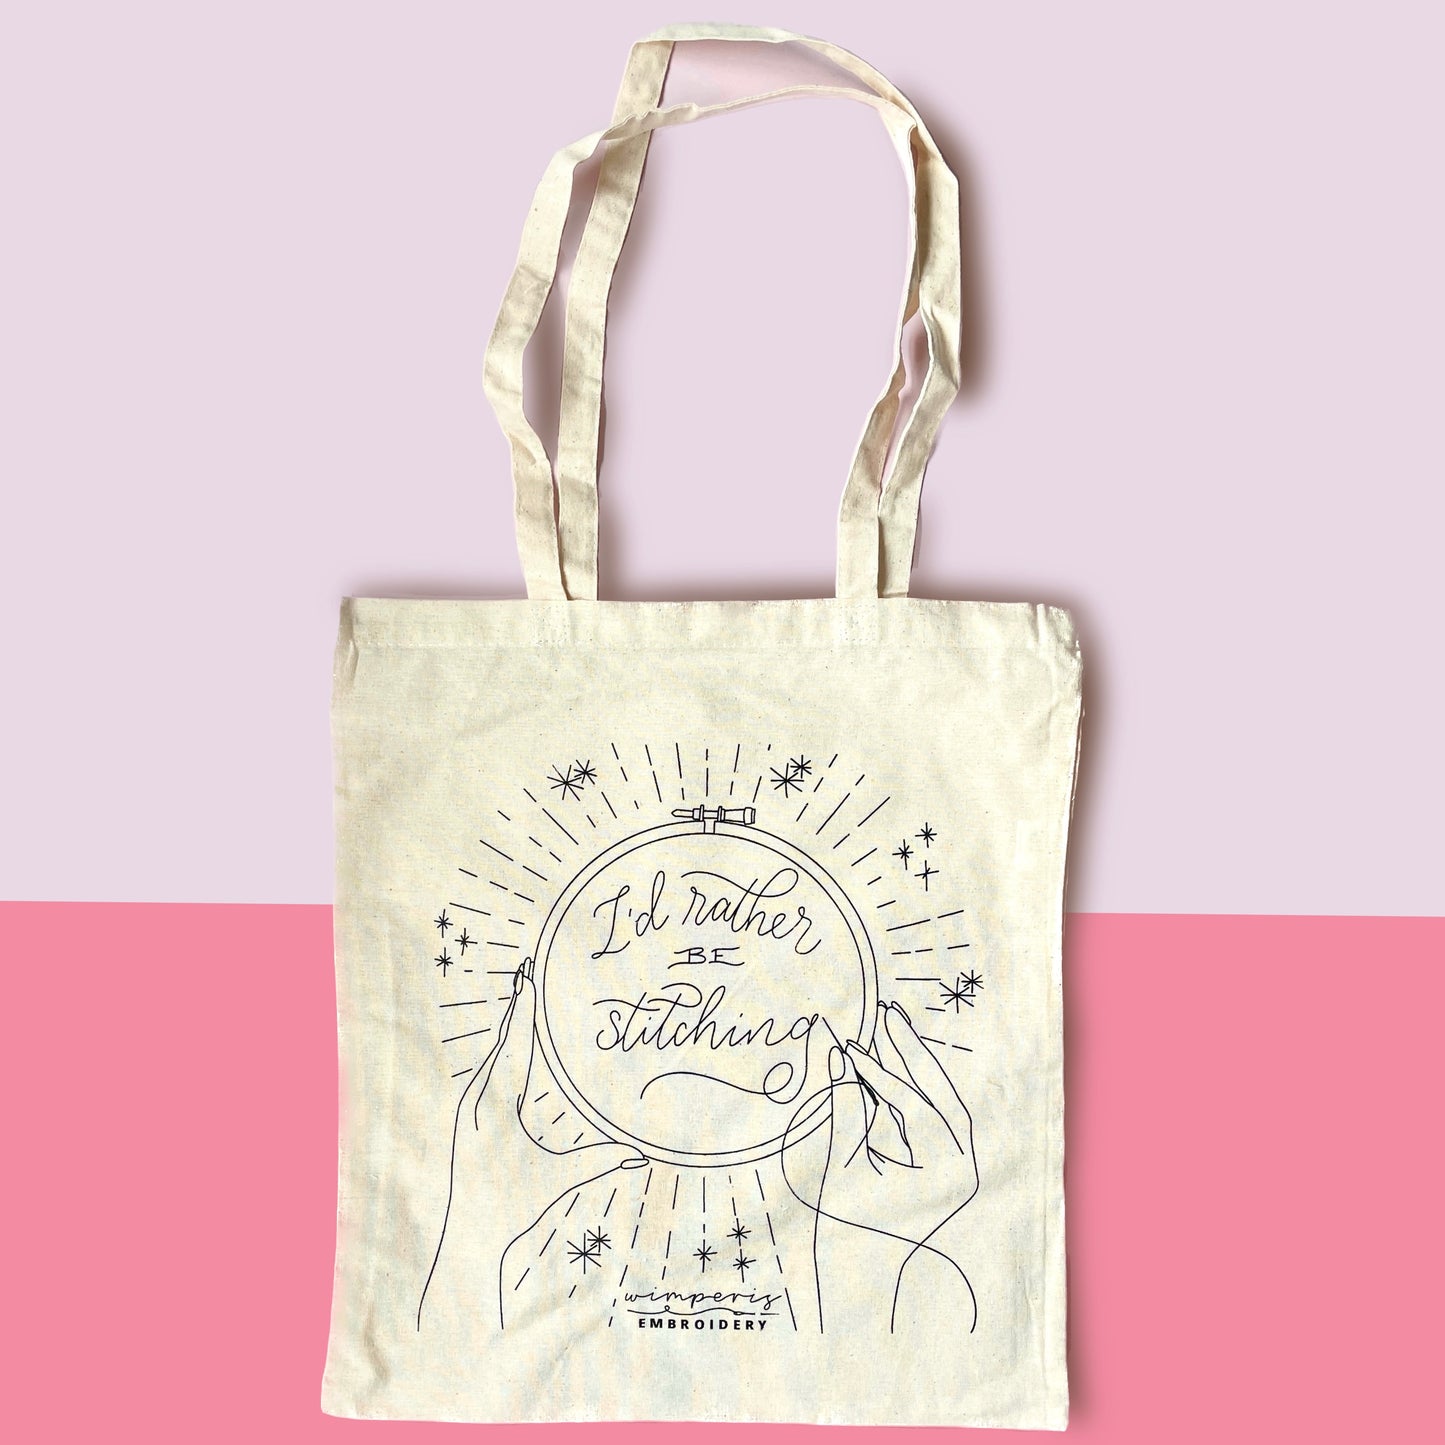 Wimperis Embroidery "I'd Rather Be Stitching" Tote Bag